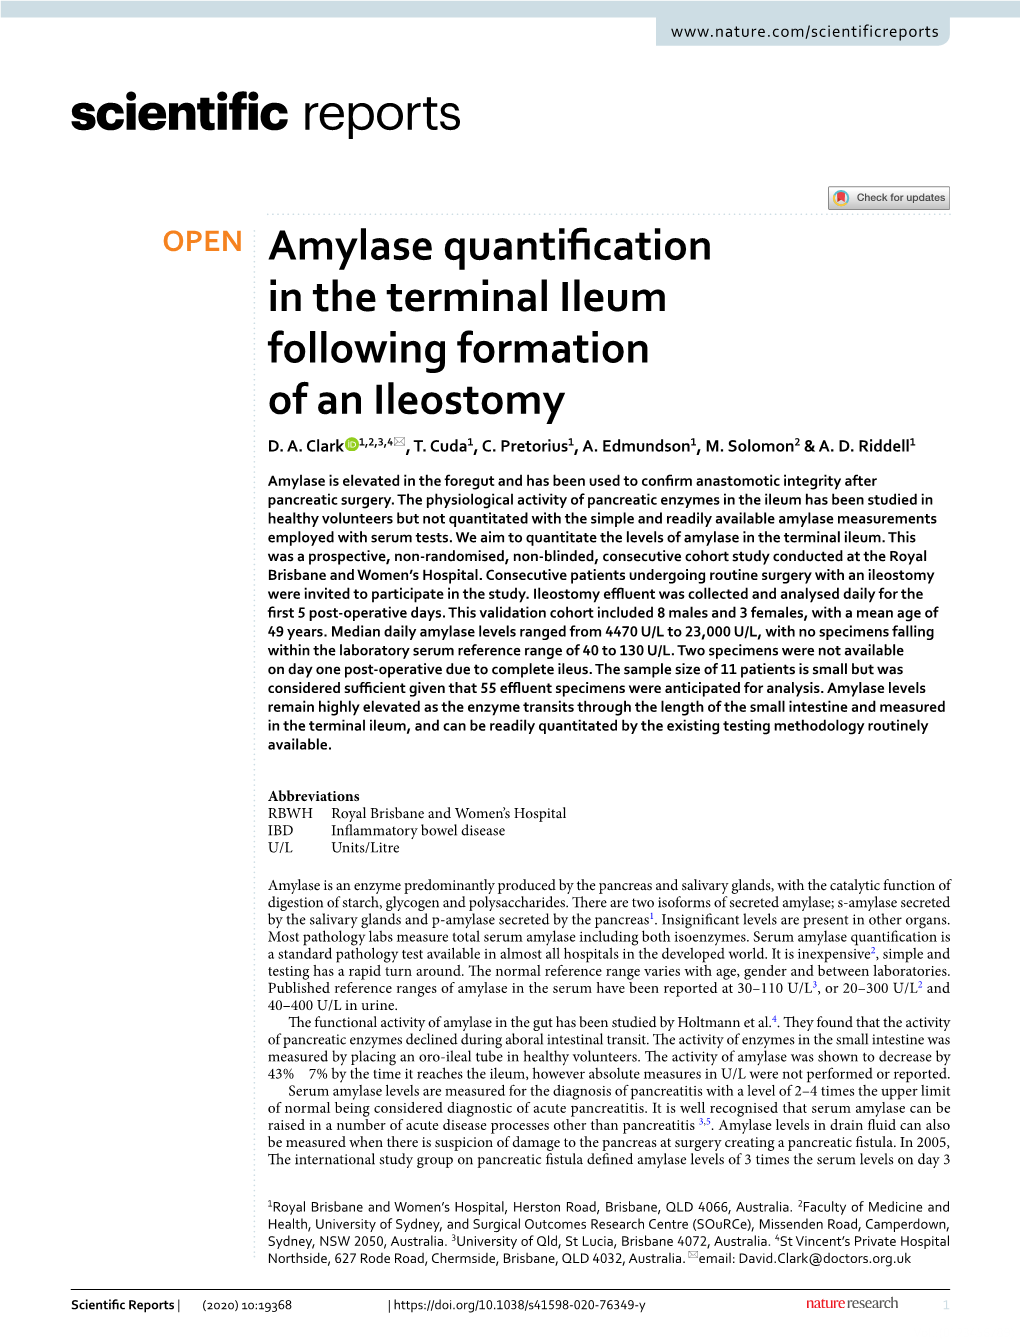 Amylase Quantification in the Terminal Ileum Following Formation of An